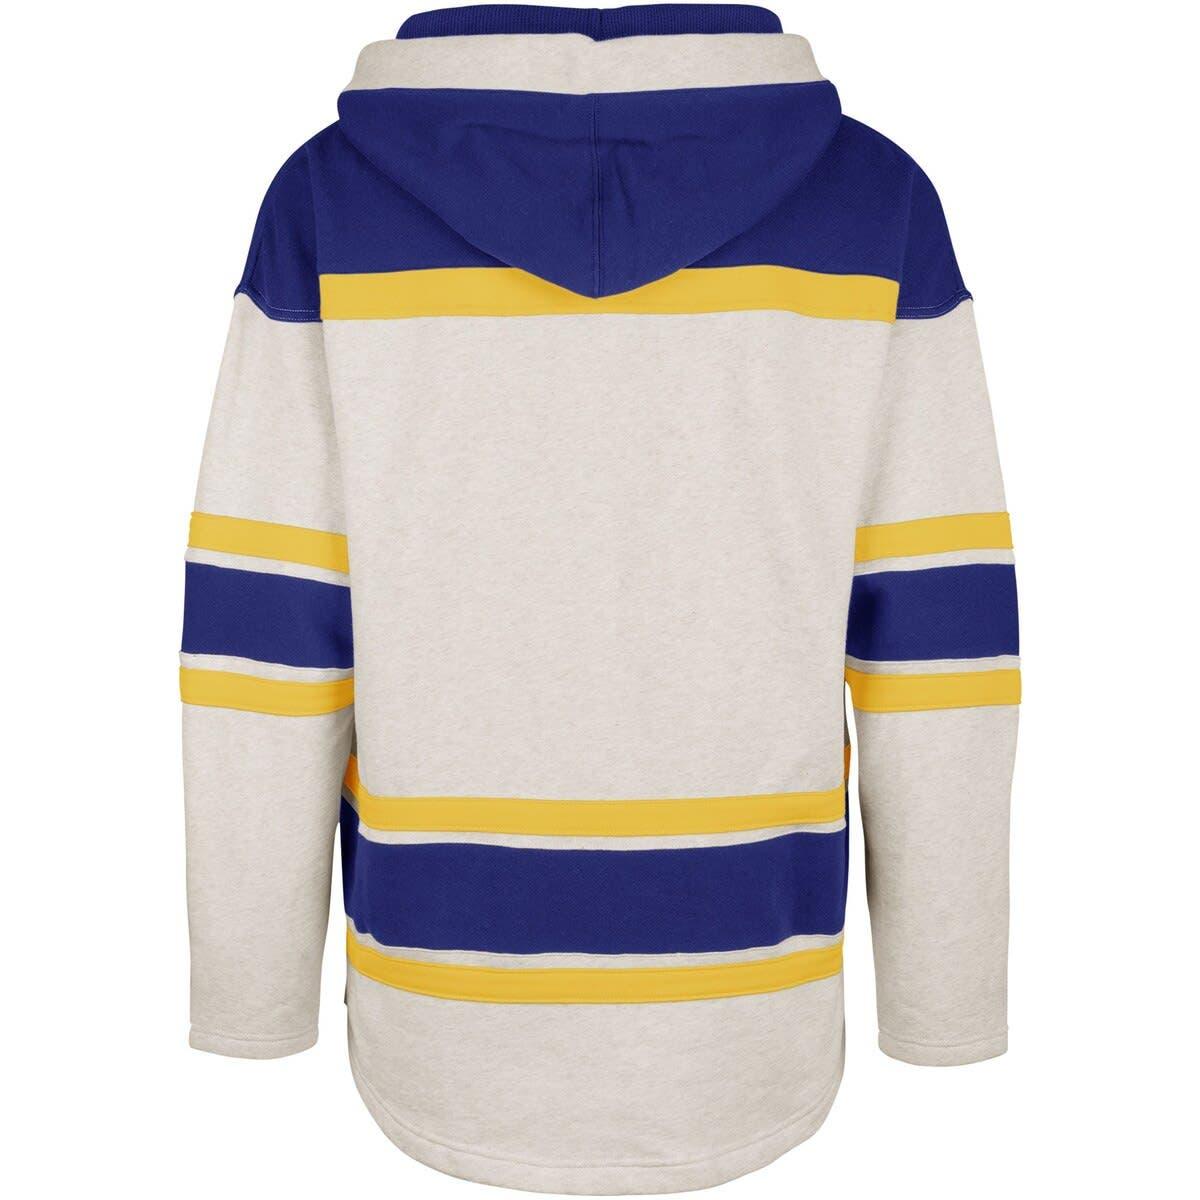 47 Colorado Avalanche Rockaway Lacer Pullover Hoodie At Nordstrom in Red  for Men